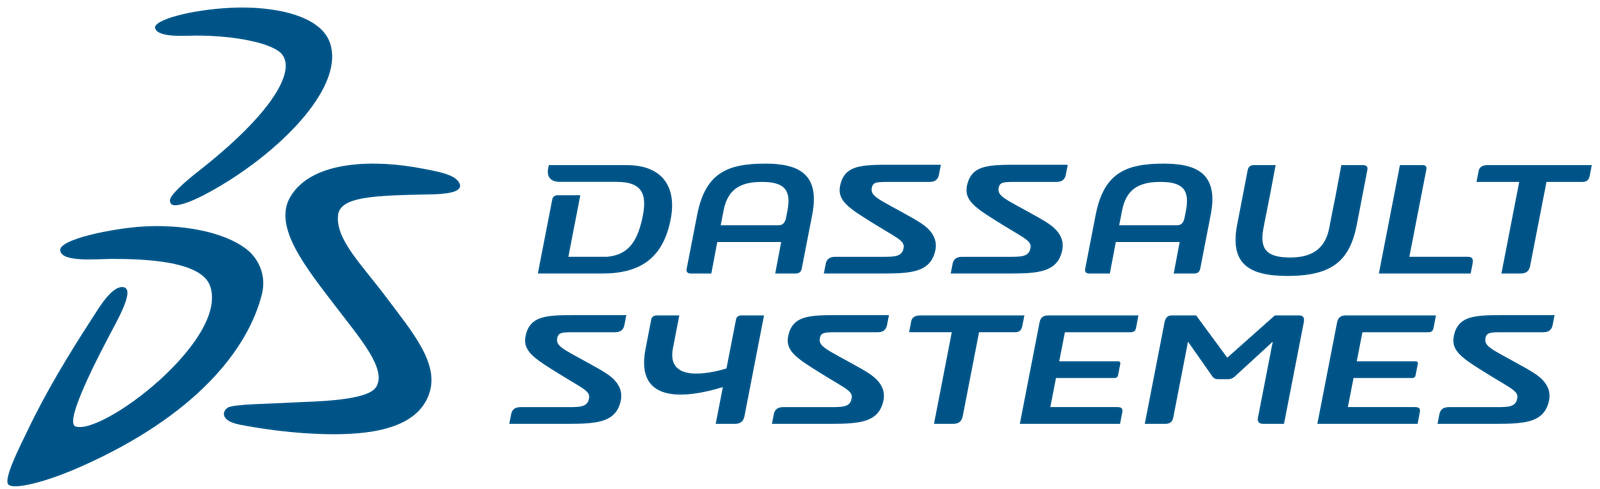 Dassault Systemes Off Campus Drive